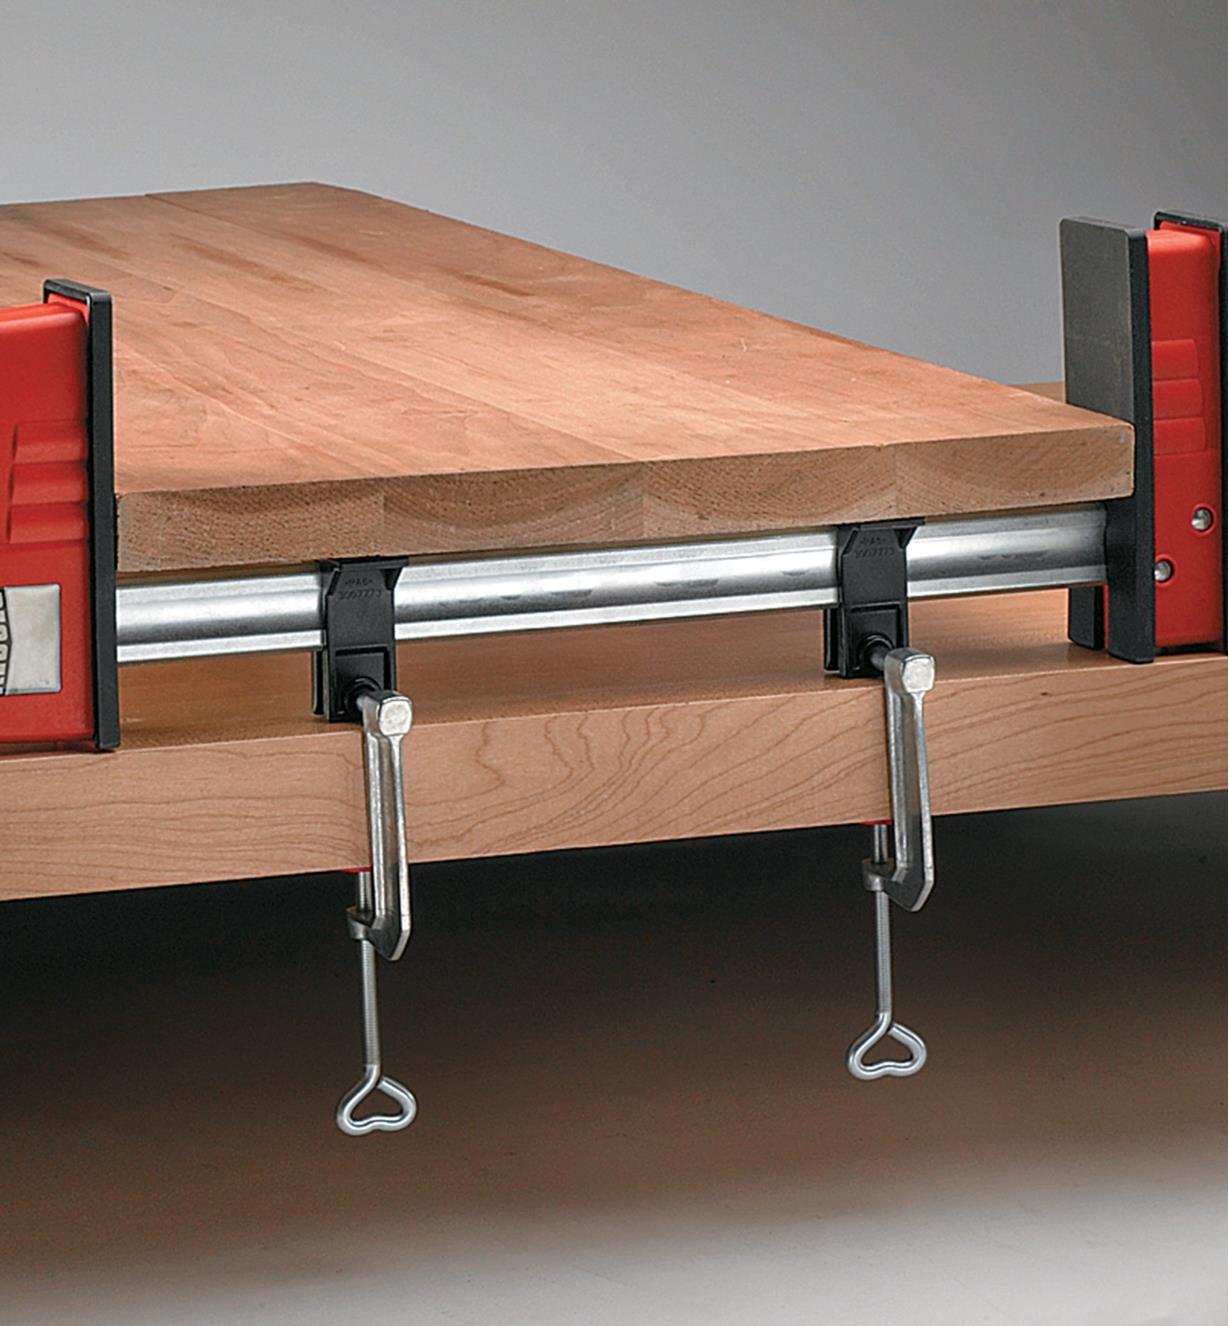 Table clamps used to secure a Bessey clamp to a worktable